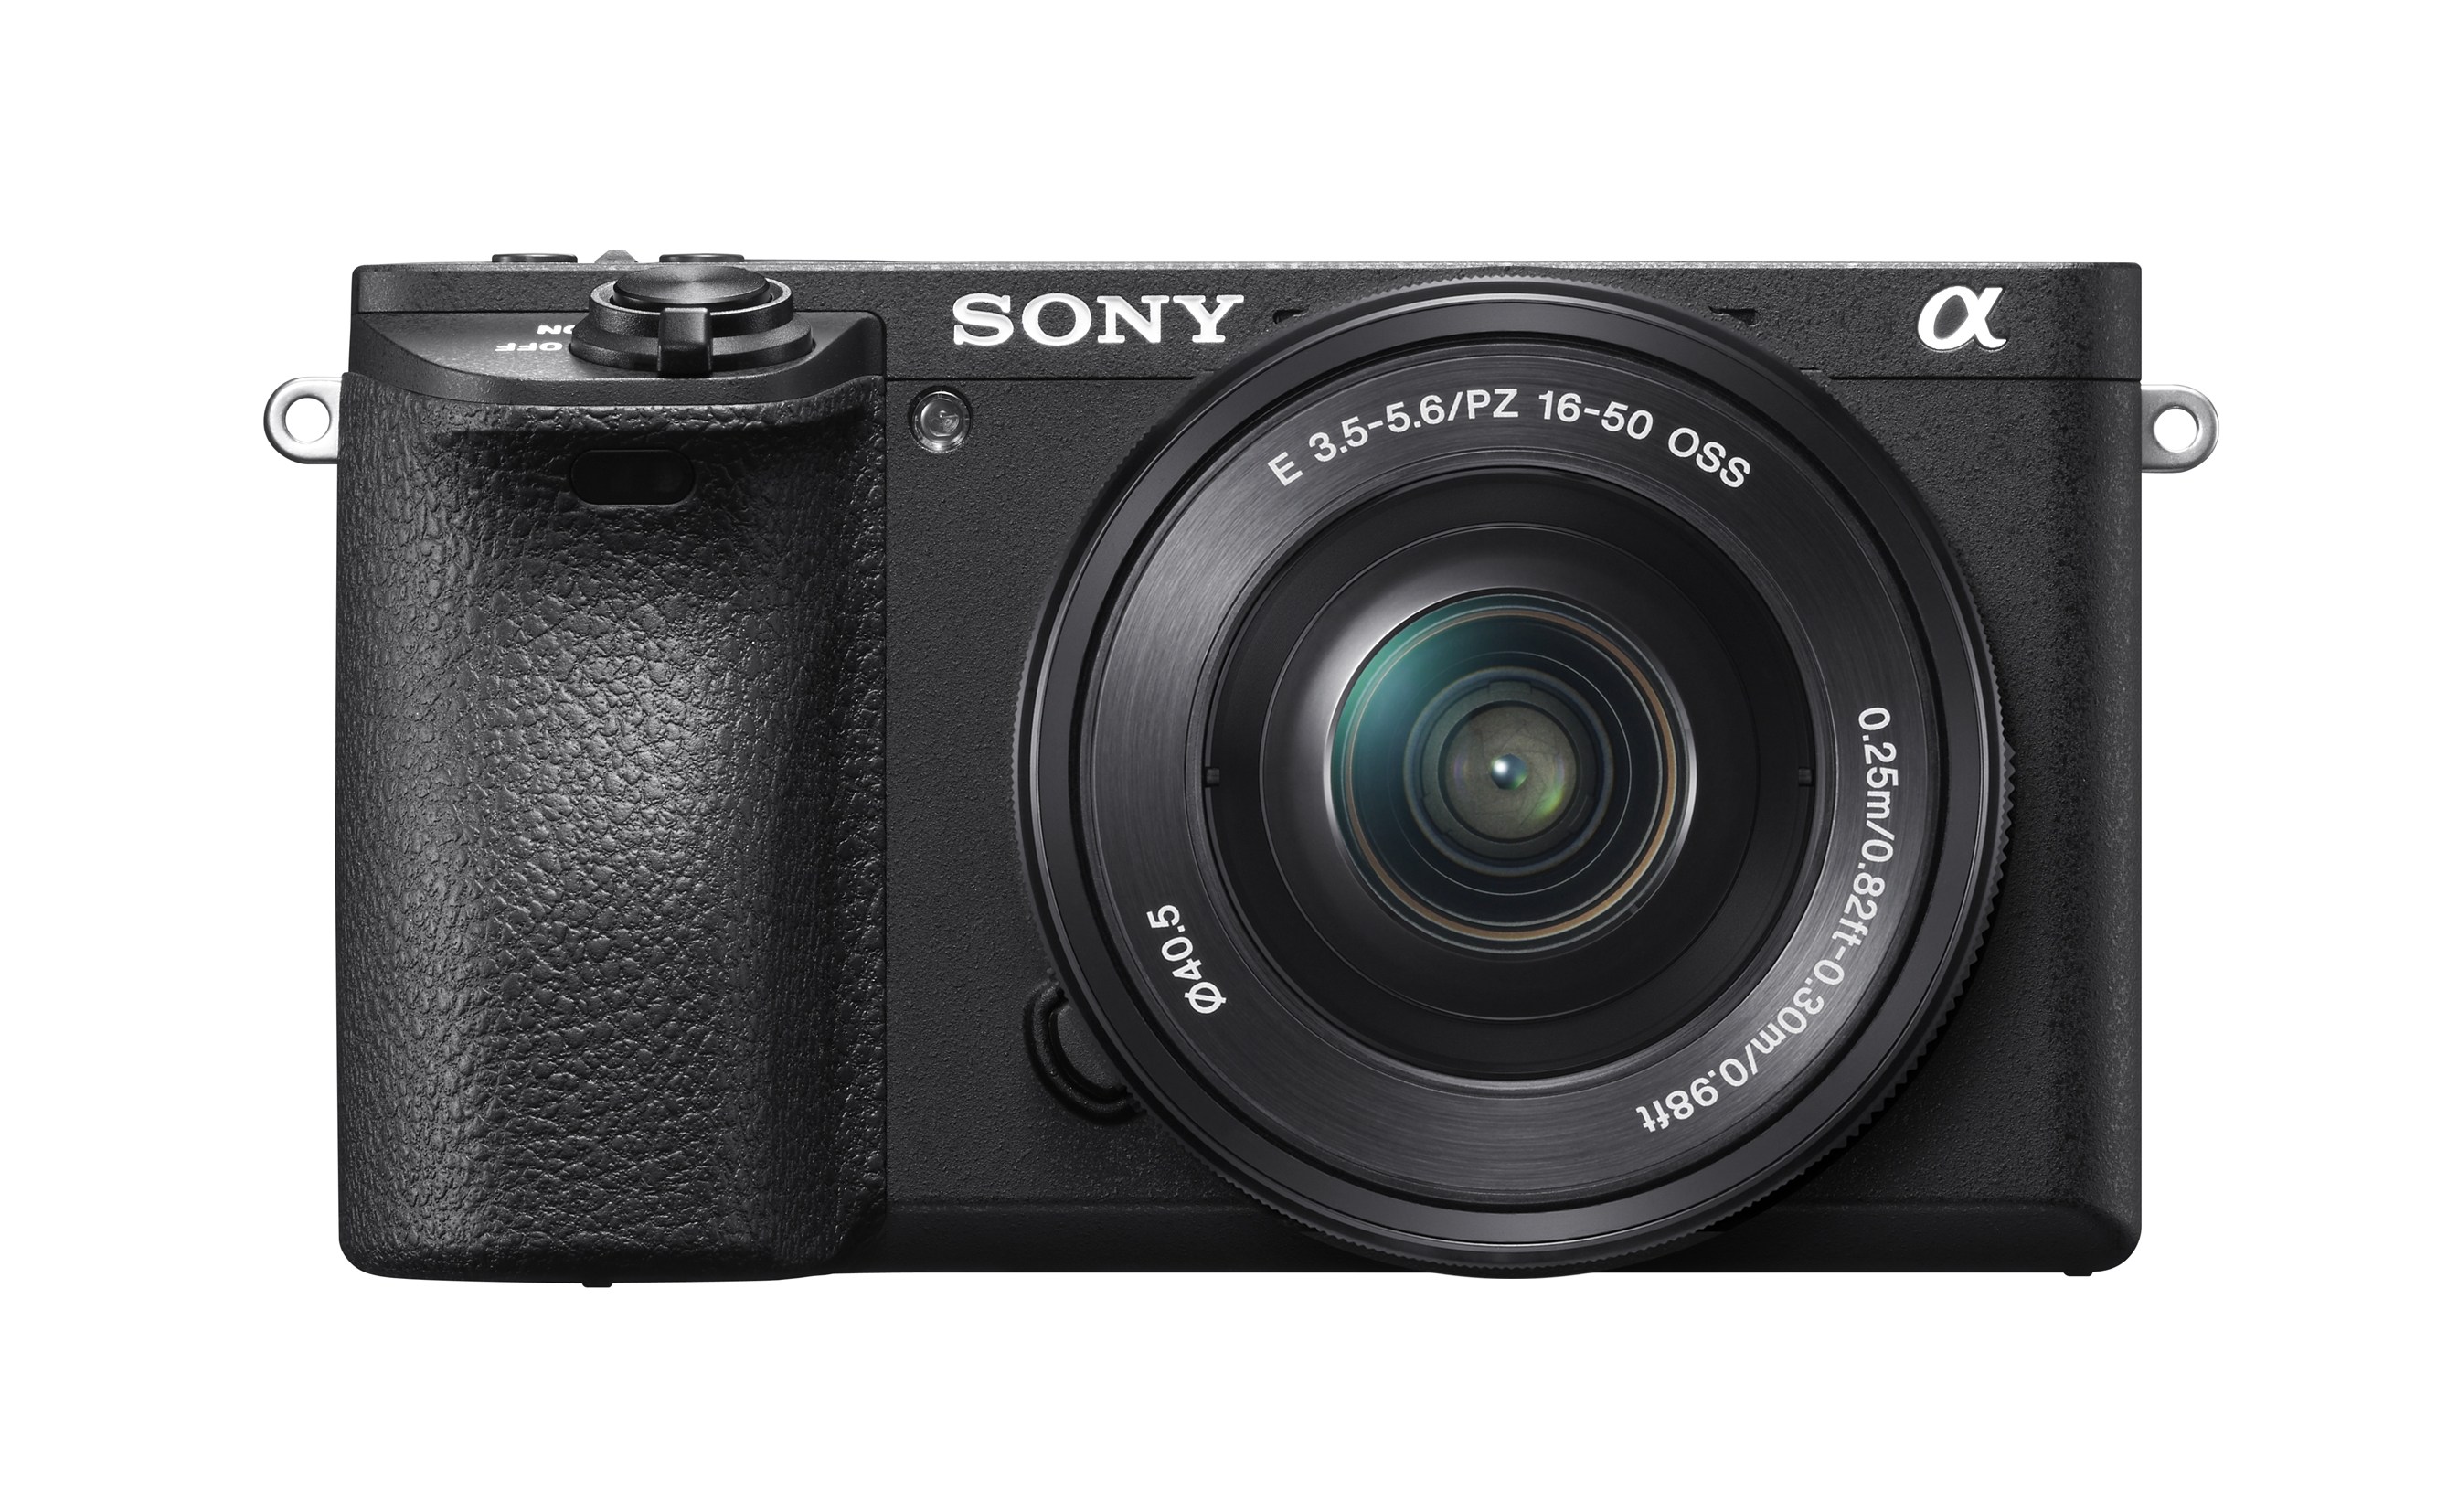 Sony Alpha a6500 Mirrorless Interchangeable-lens Camera - Black - image 2 of 7